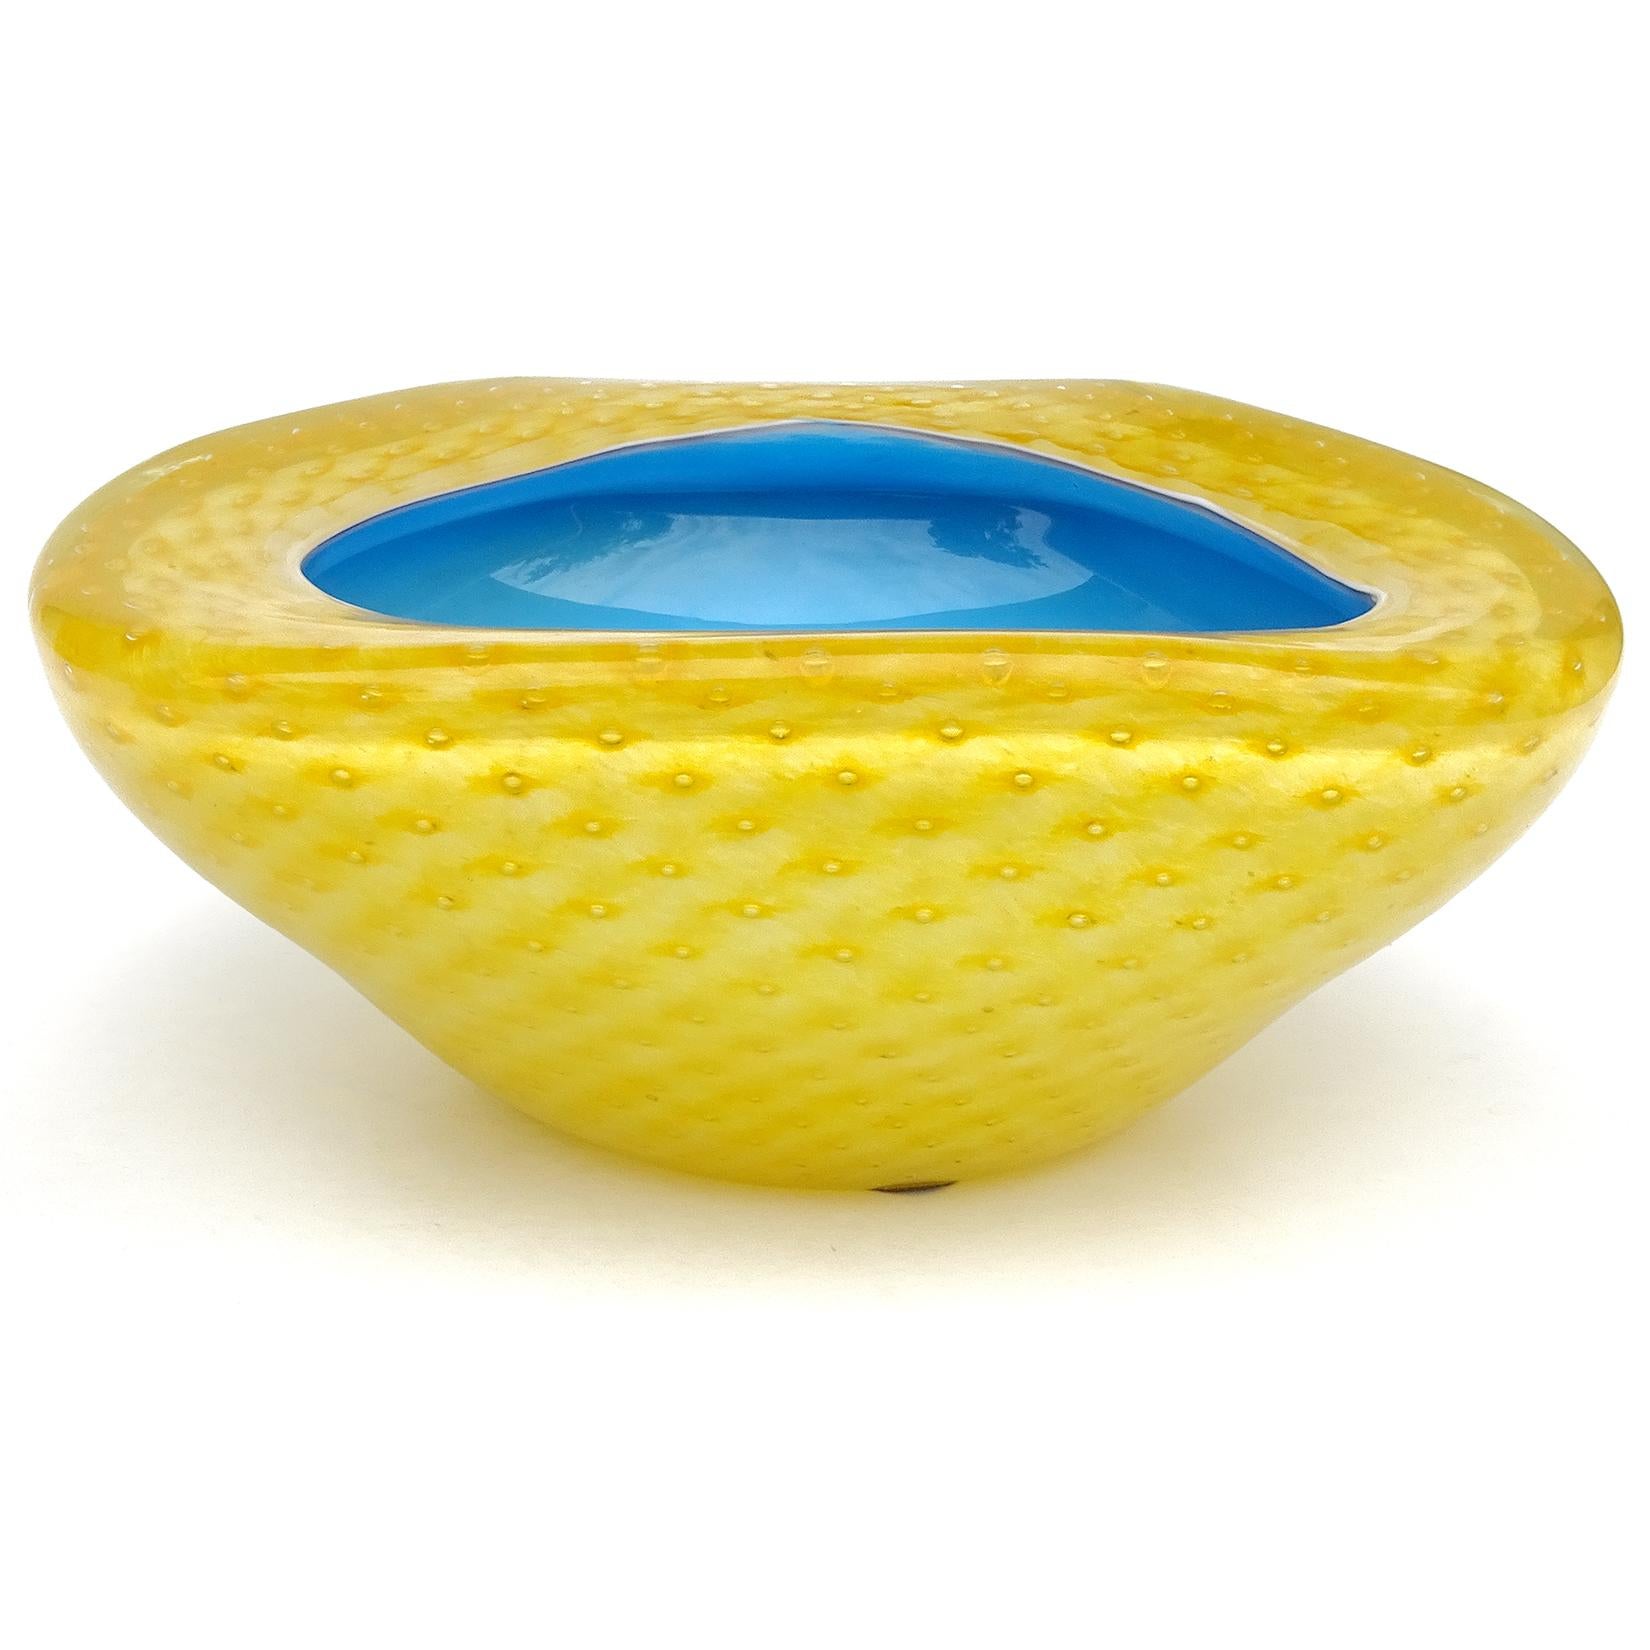 Beautiful vintage Murano hand blown yellow over blue, and controlled bubbles Italian art glass bowl / ashtray. Documented to the Fratelli Toso company, circa 1950-1960. The bowl still retains an original, but worn, 